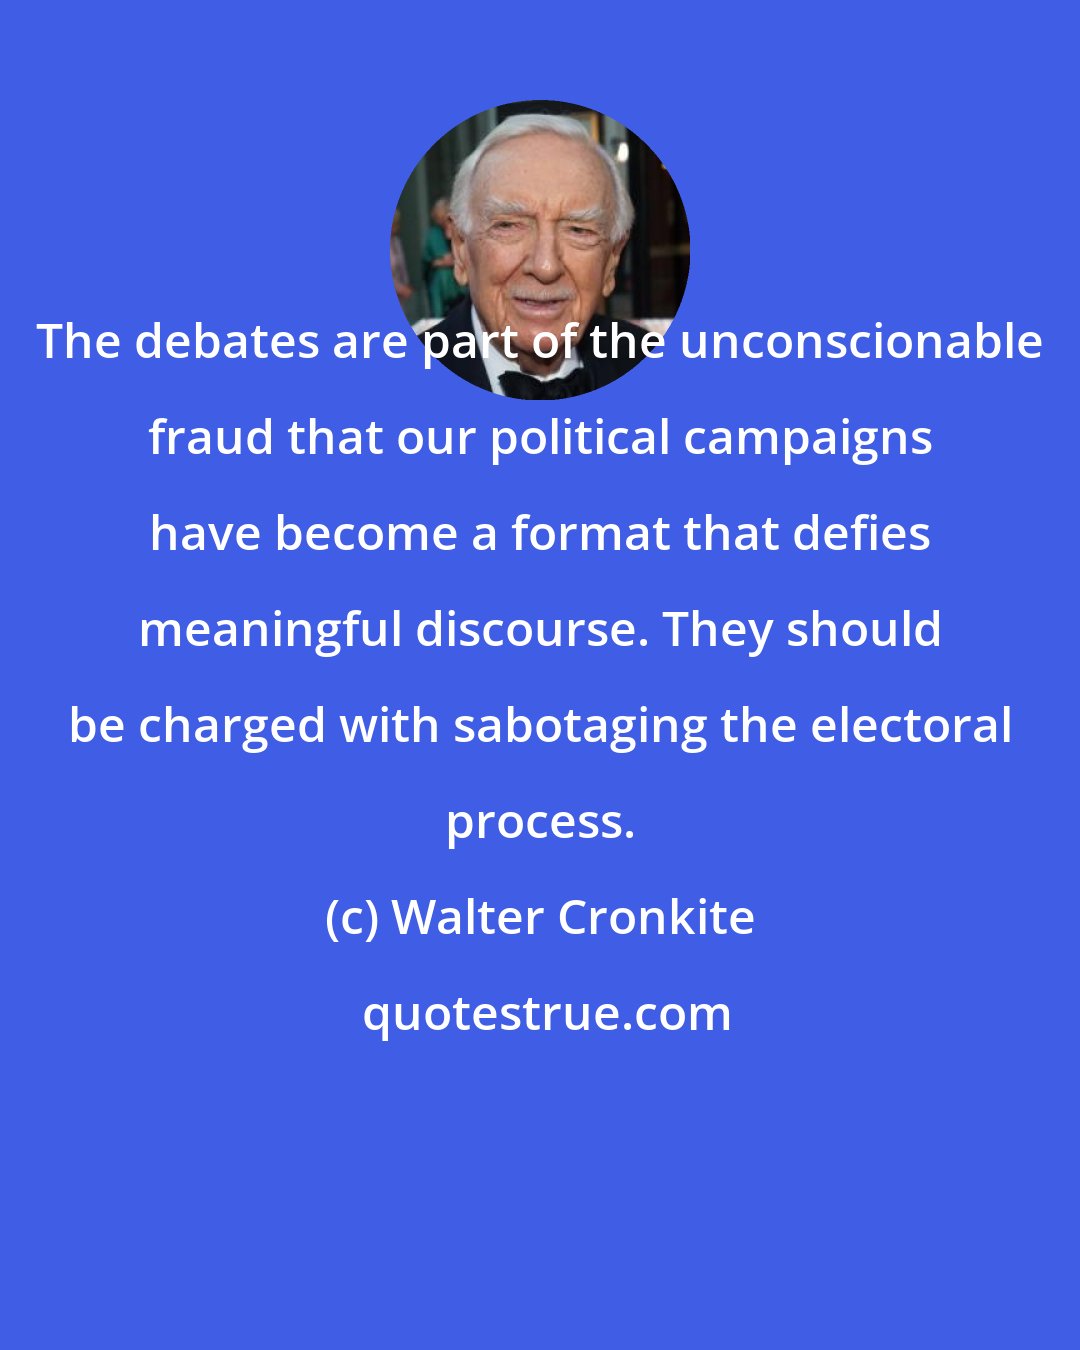 Walter Cronkite: The debates are part of the unconscionable fraud that our political campaigns have become a format that defies meaningful discourse. They should be charged with sabotaging the electoral process.